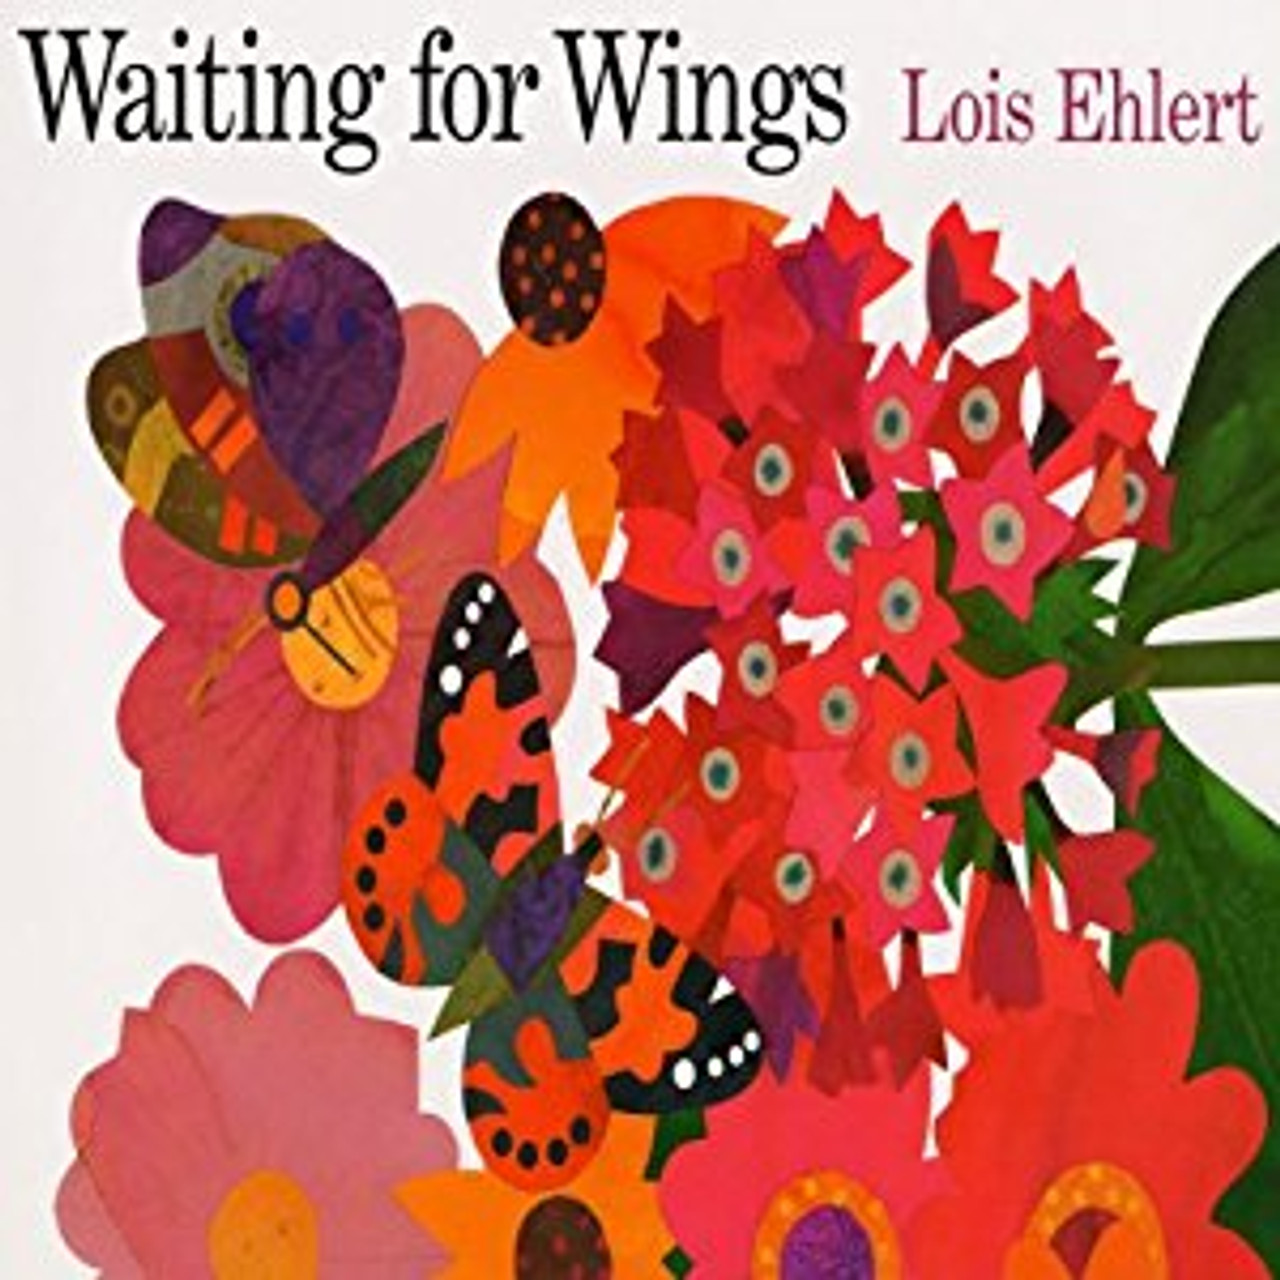 Waiting for Wings by Lois Ehlert